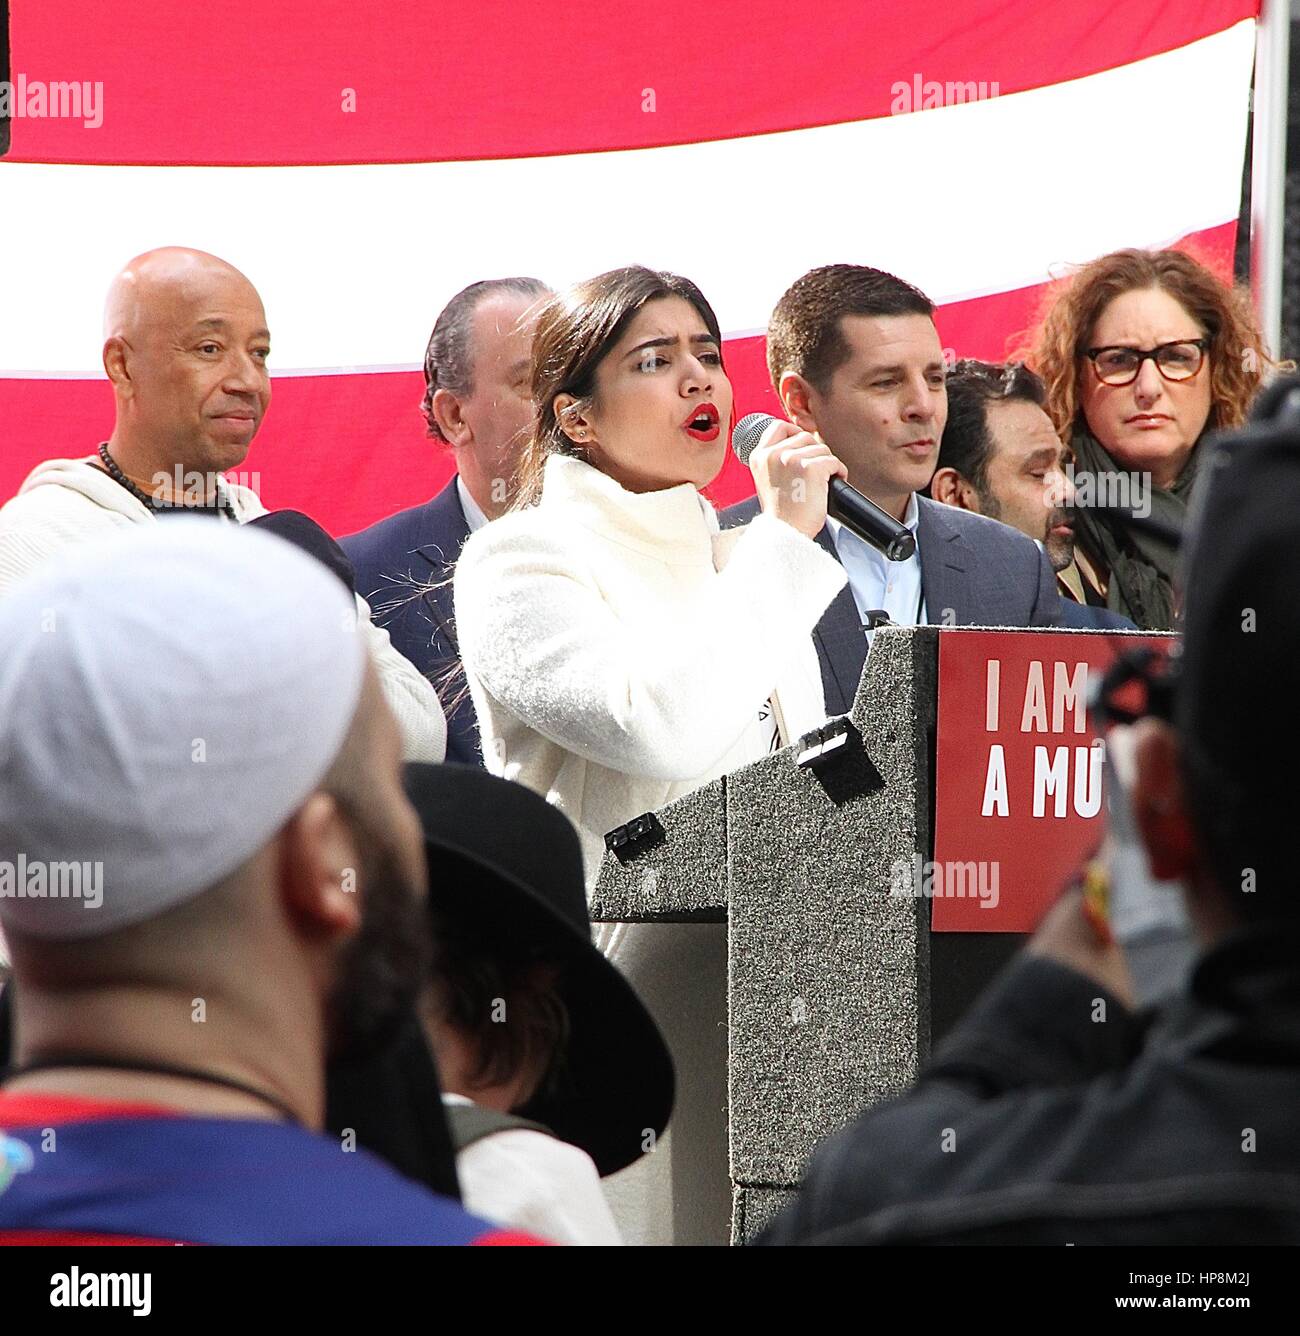 New York, NY, USA. 19th Feb, 2017. A woman singing the National Anthem at the 'I Am Muslim Too' rally in Times Square coordinated by hip hop mogul Russell Simmons and a group of interfaith religious leaders in New York, New York on February 19, 2017. Credit: Rainmaker Photo/Media Punch/Alamy Live News Stock Photo